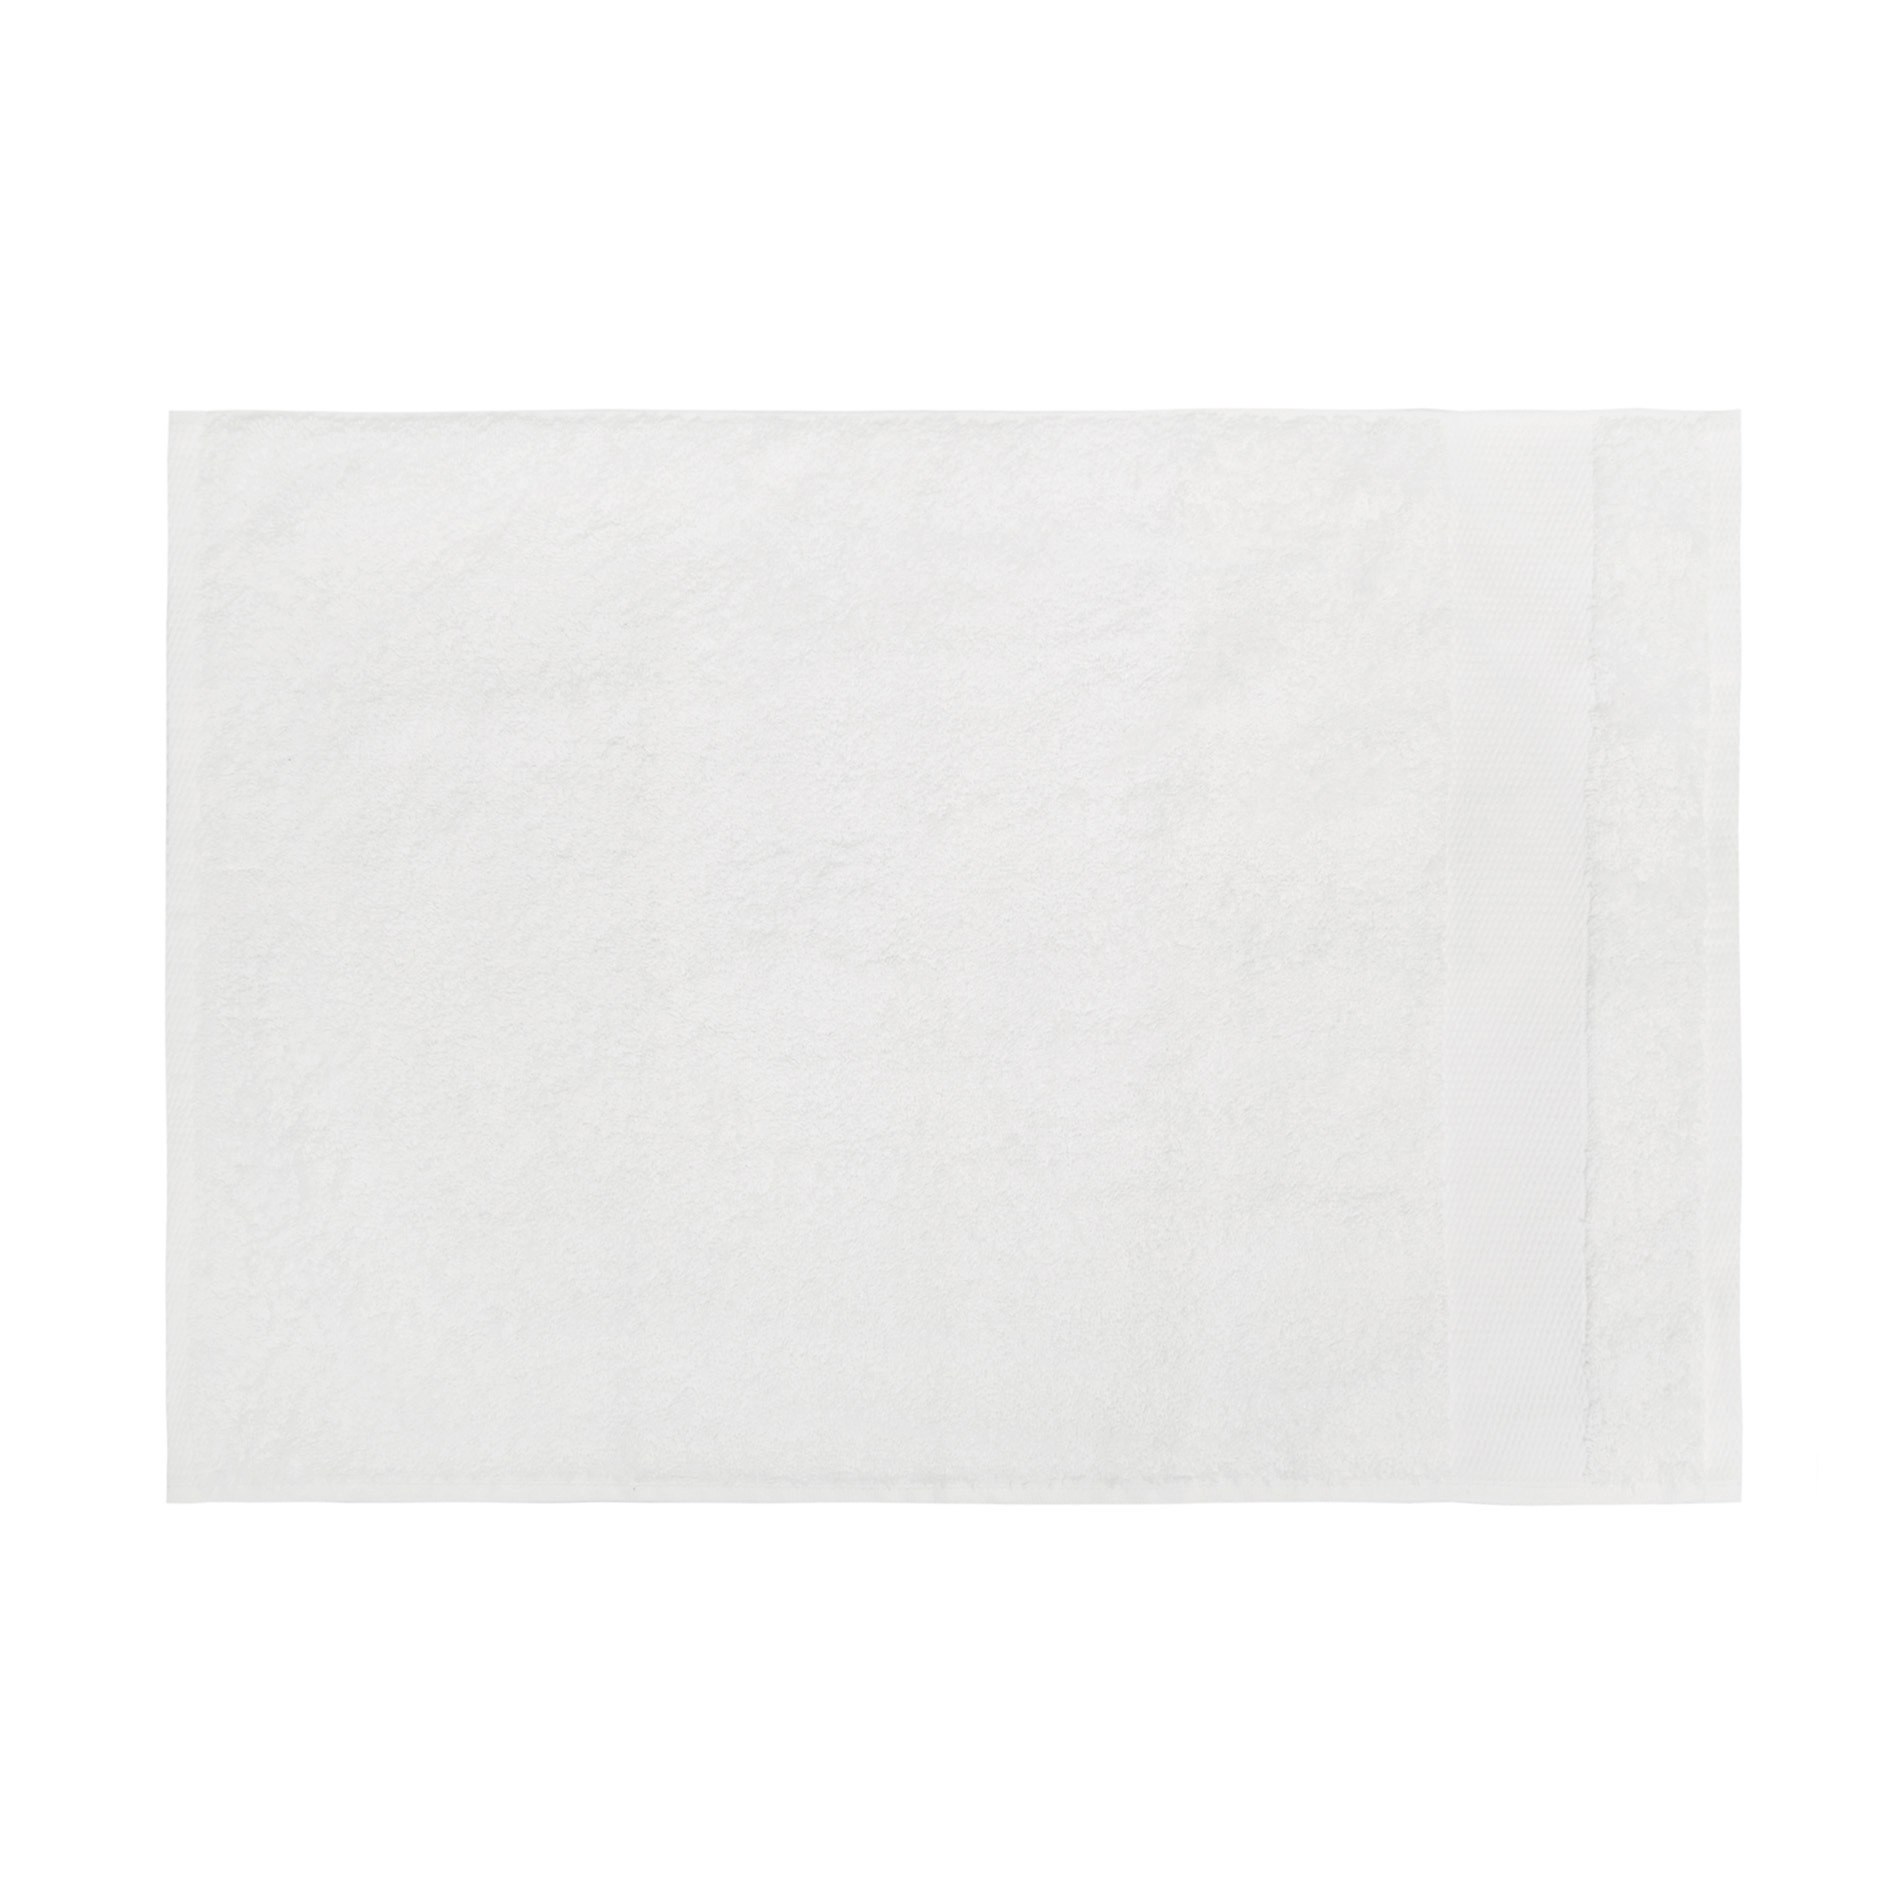 Zefiro pure cotton terry towel, White, large image number 2